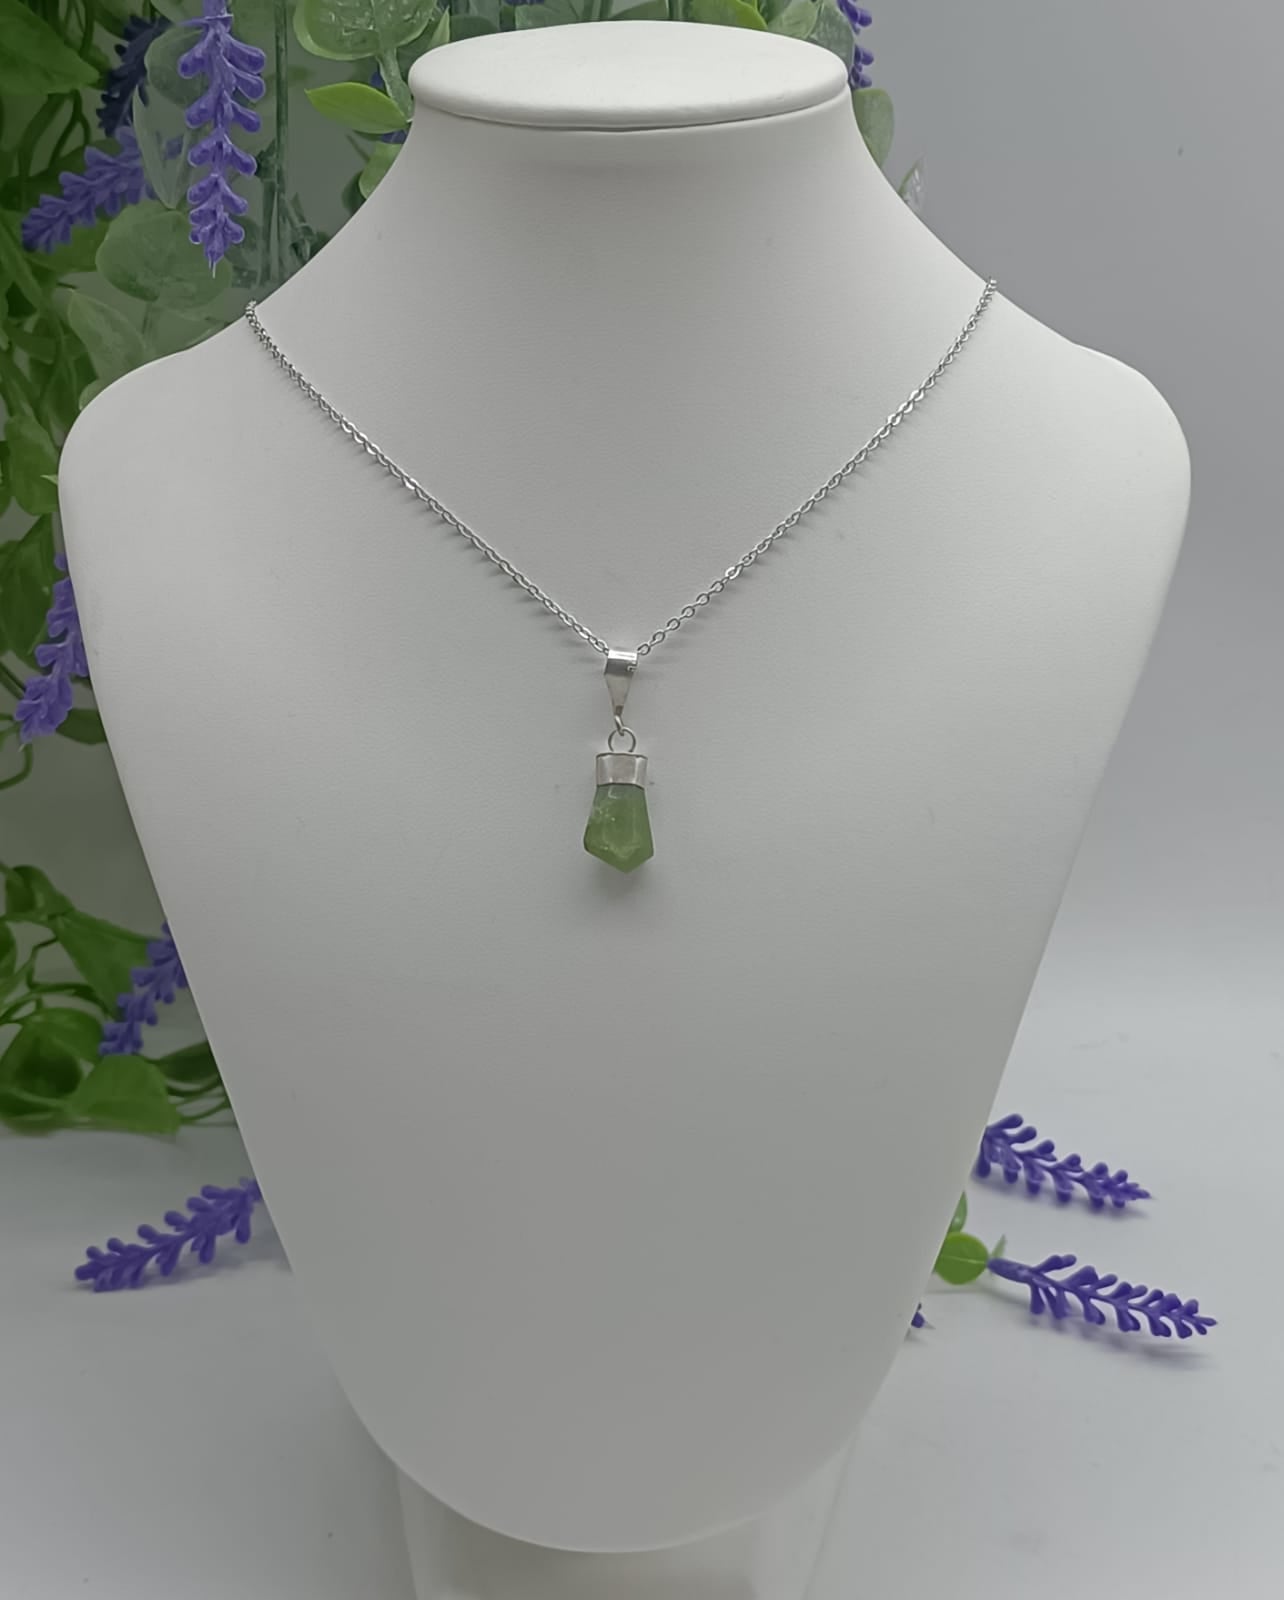 Peridot 925 Sterling Silver Pendant (Chain included)
